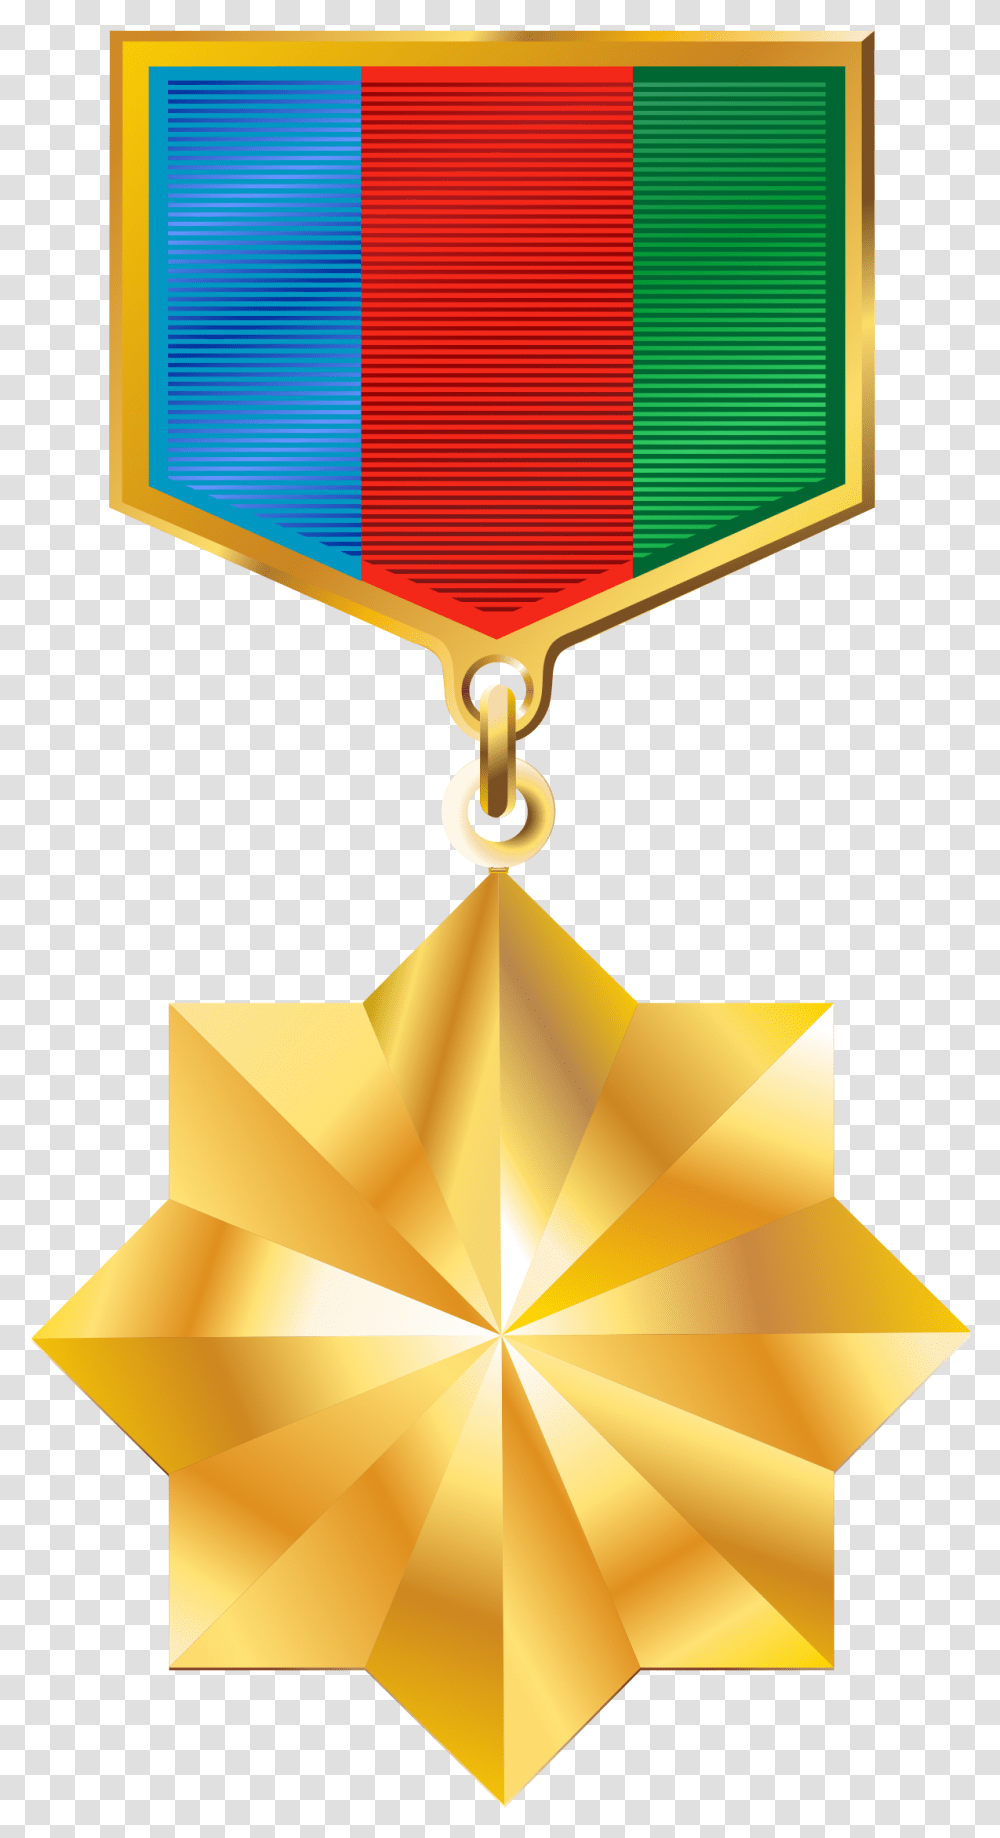 Library Of Star Medal Clipart Black And White Files Golden Medal Clipart, Lamp, Gold Medal, Trophy Transparent Png